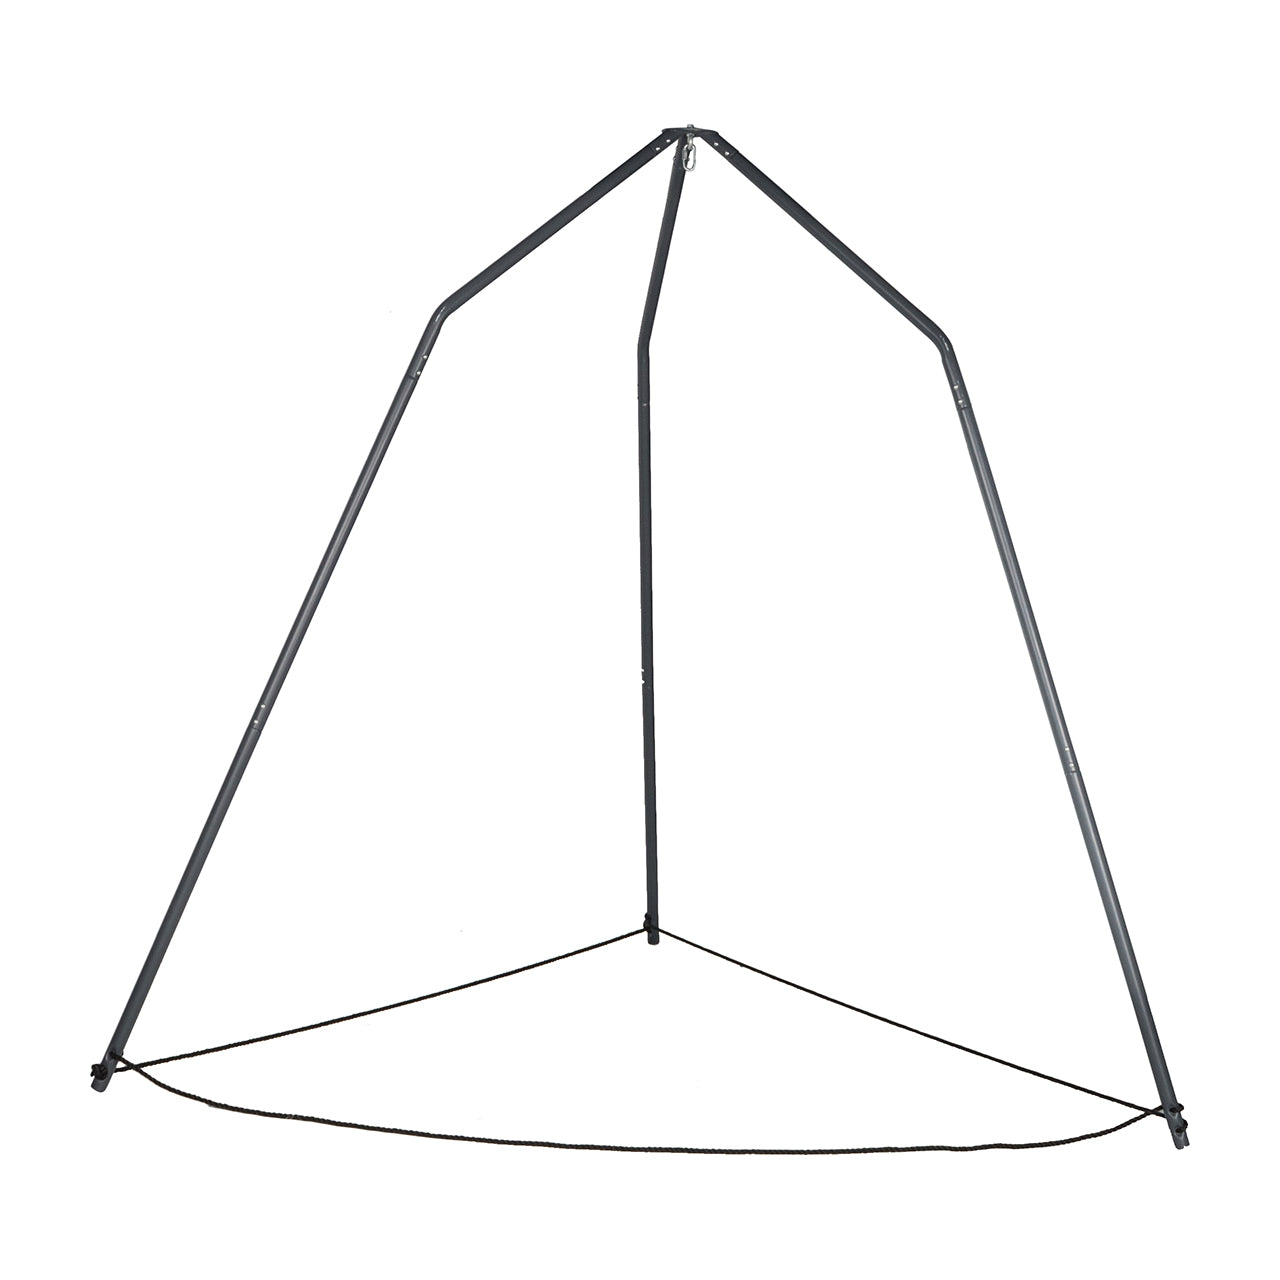 Bliss Hammocks 96-inch Overhead Tripod Stand with Supporting Base Ropes.